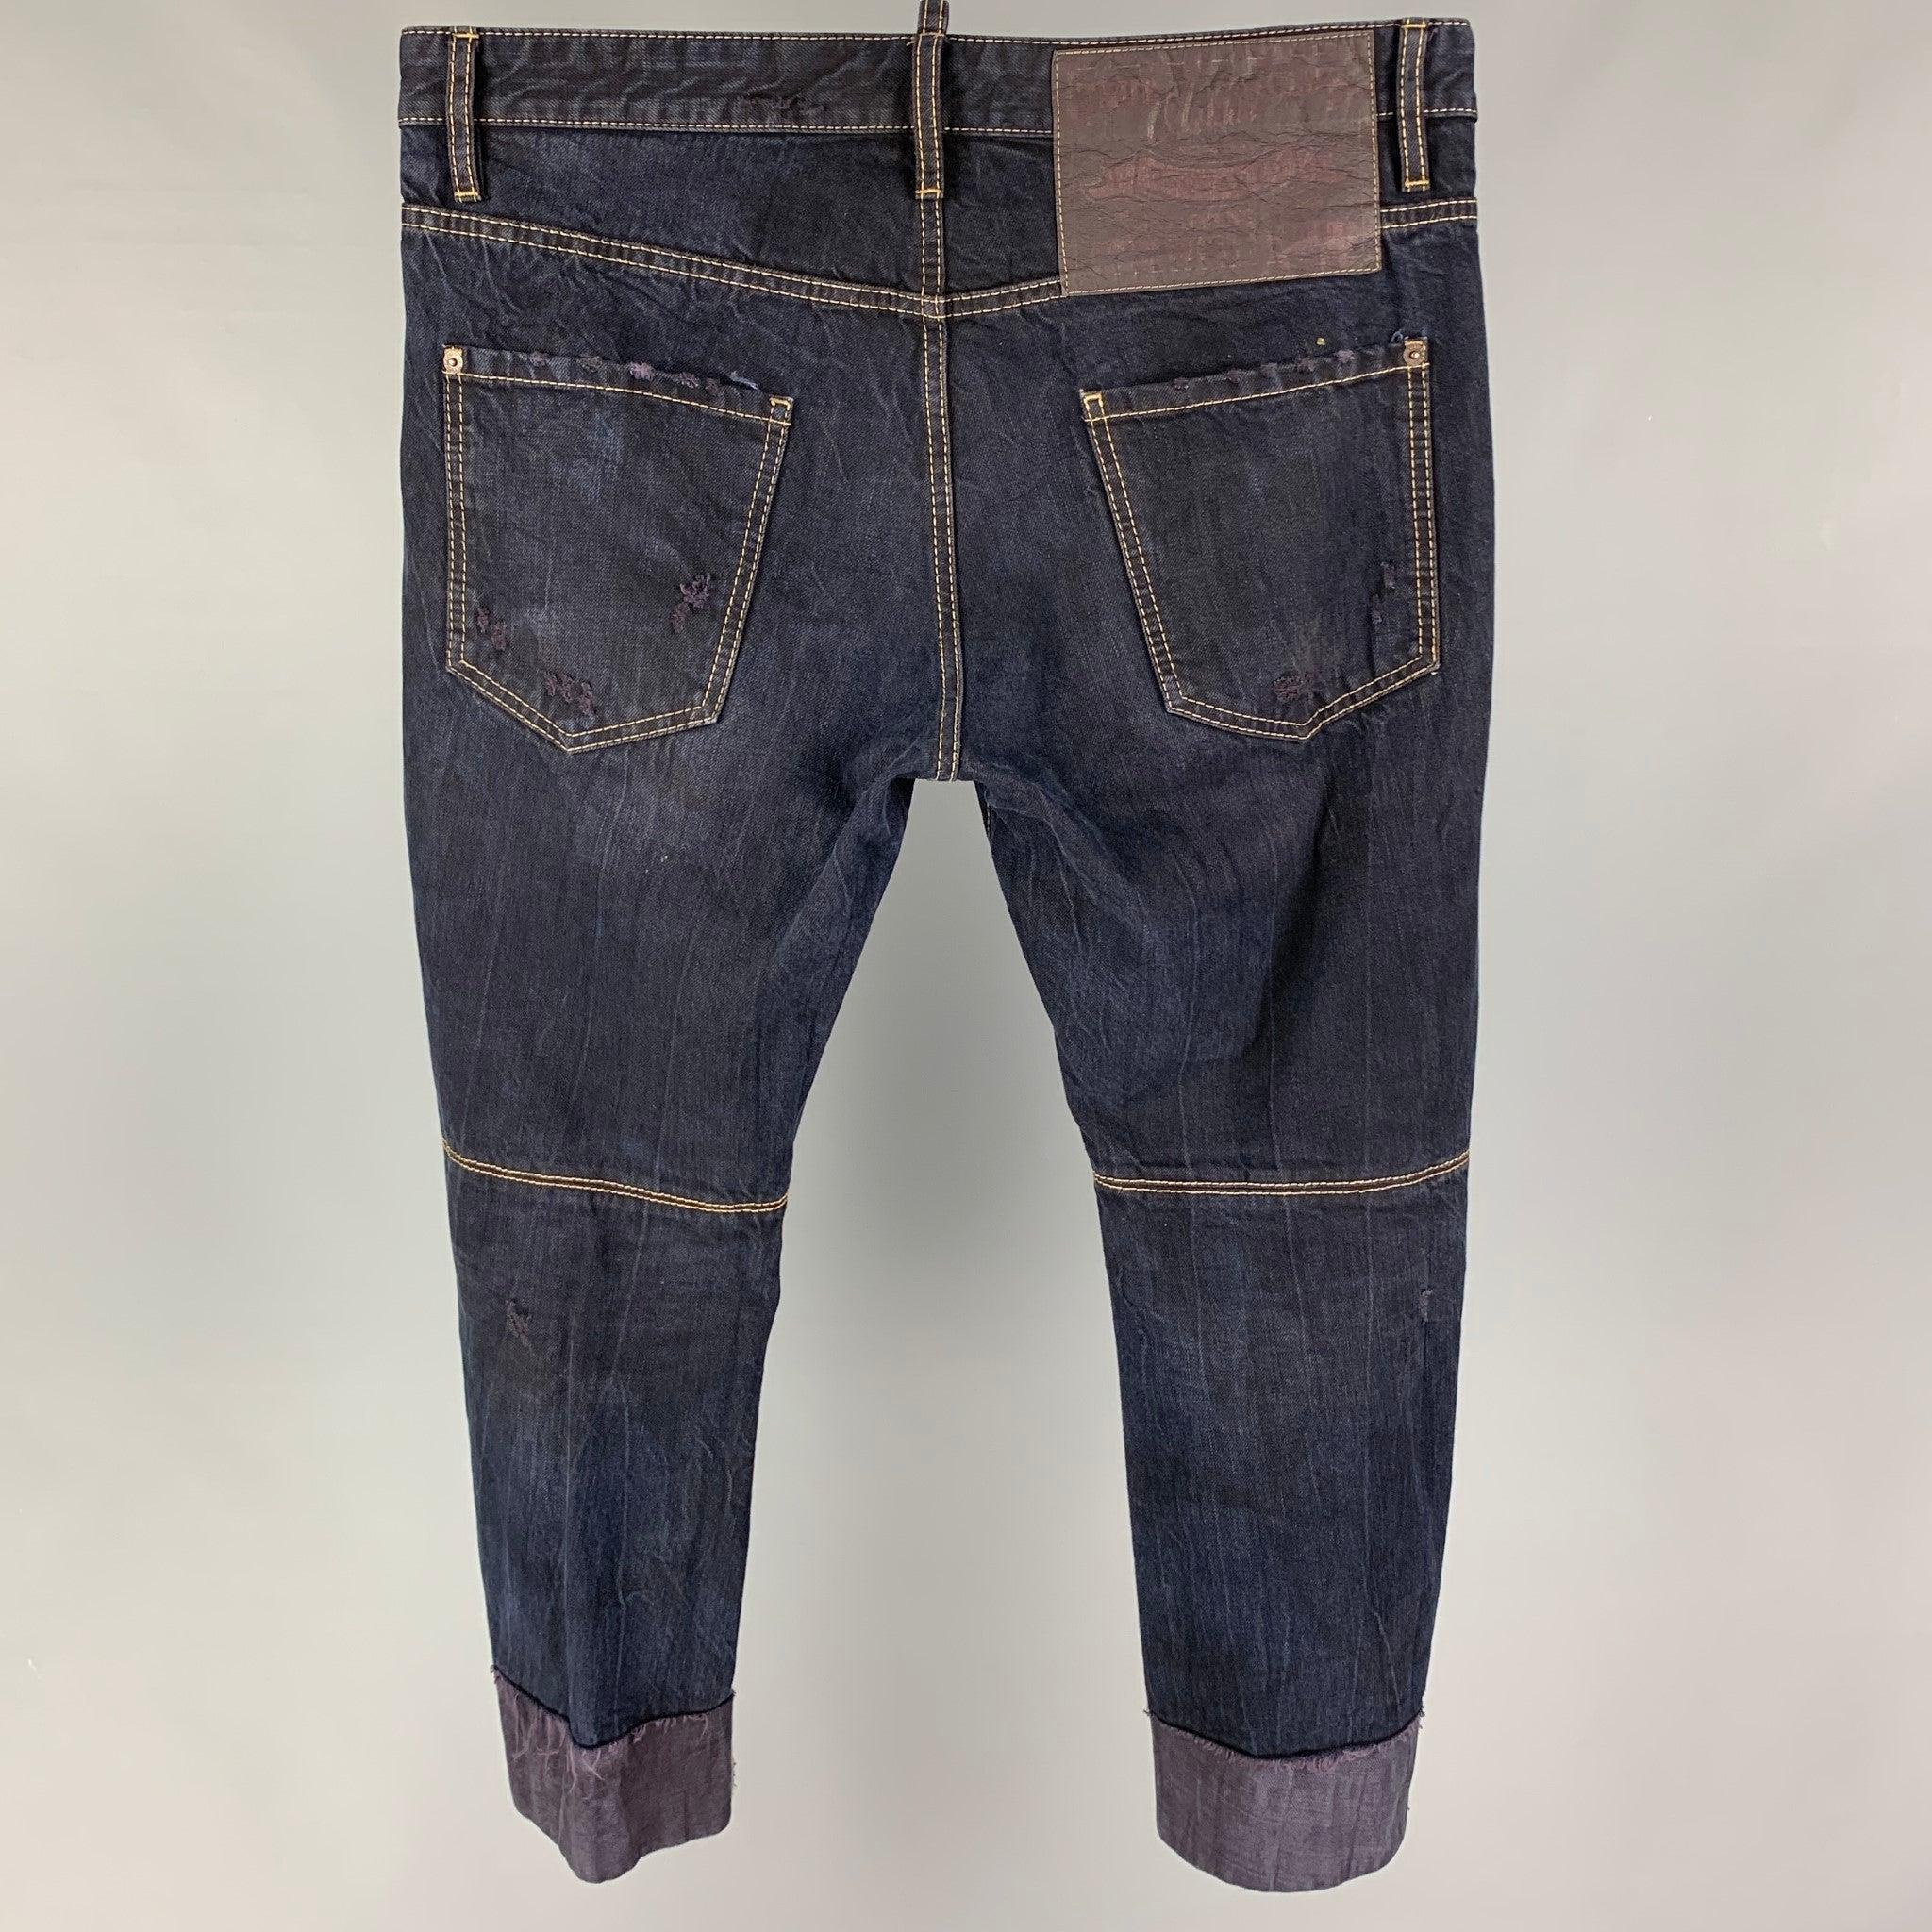 DSQUARED2 jeans comes in a dark navy distressed cotton featuring cropped style, contrast stitching, and a button fly closure. Made in Italy.
Good
Pre-Owned Condition. 

Marked:   50 

Measurements: 
  Waist: 36 inches  Rise: 11 inches  Inseam: 26